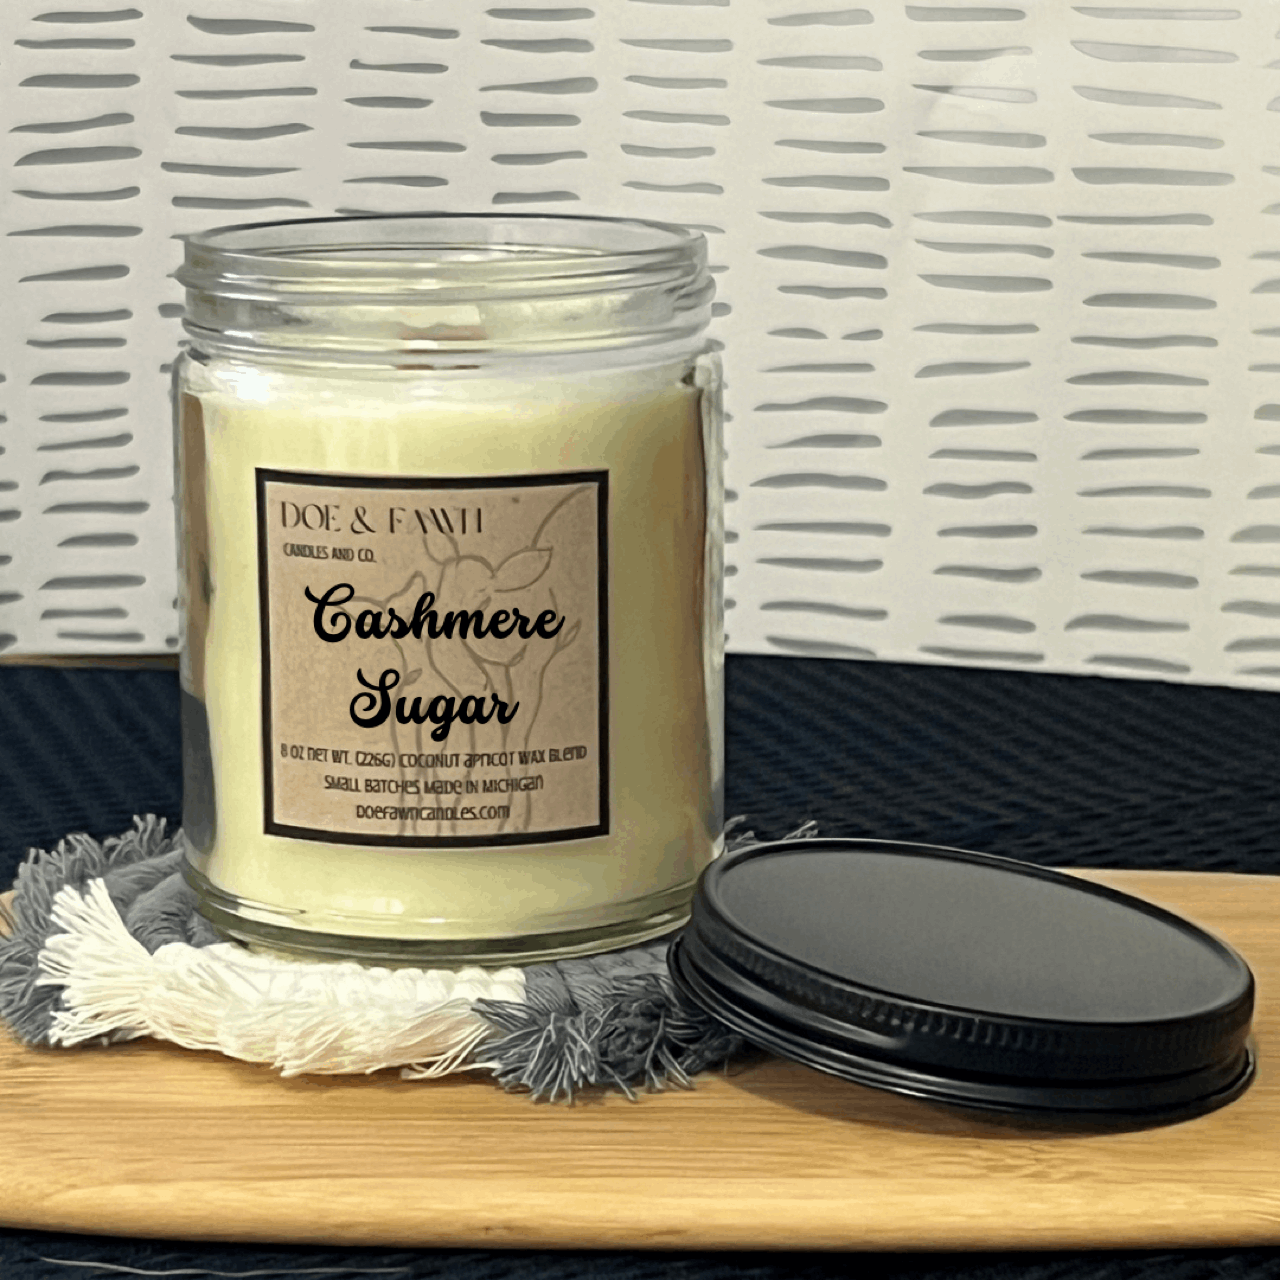 CASHMERE SUGAR / 8 oz. Candle w/ black lid and crackling wood wick